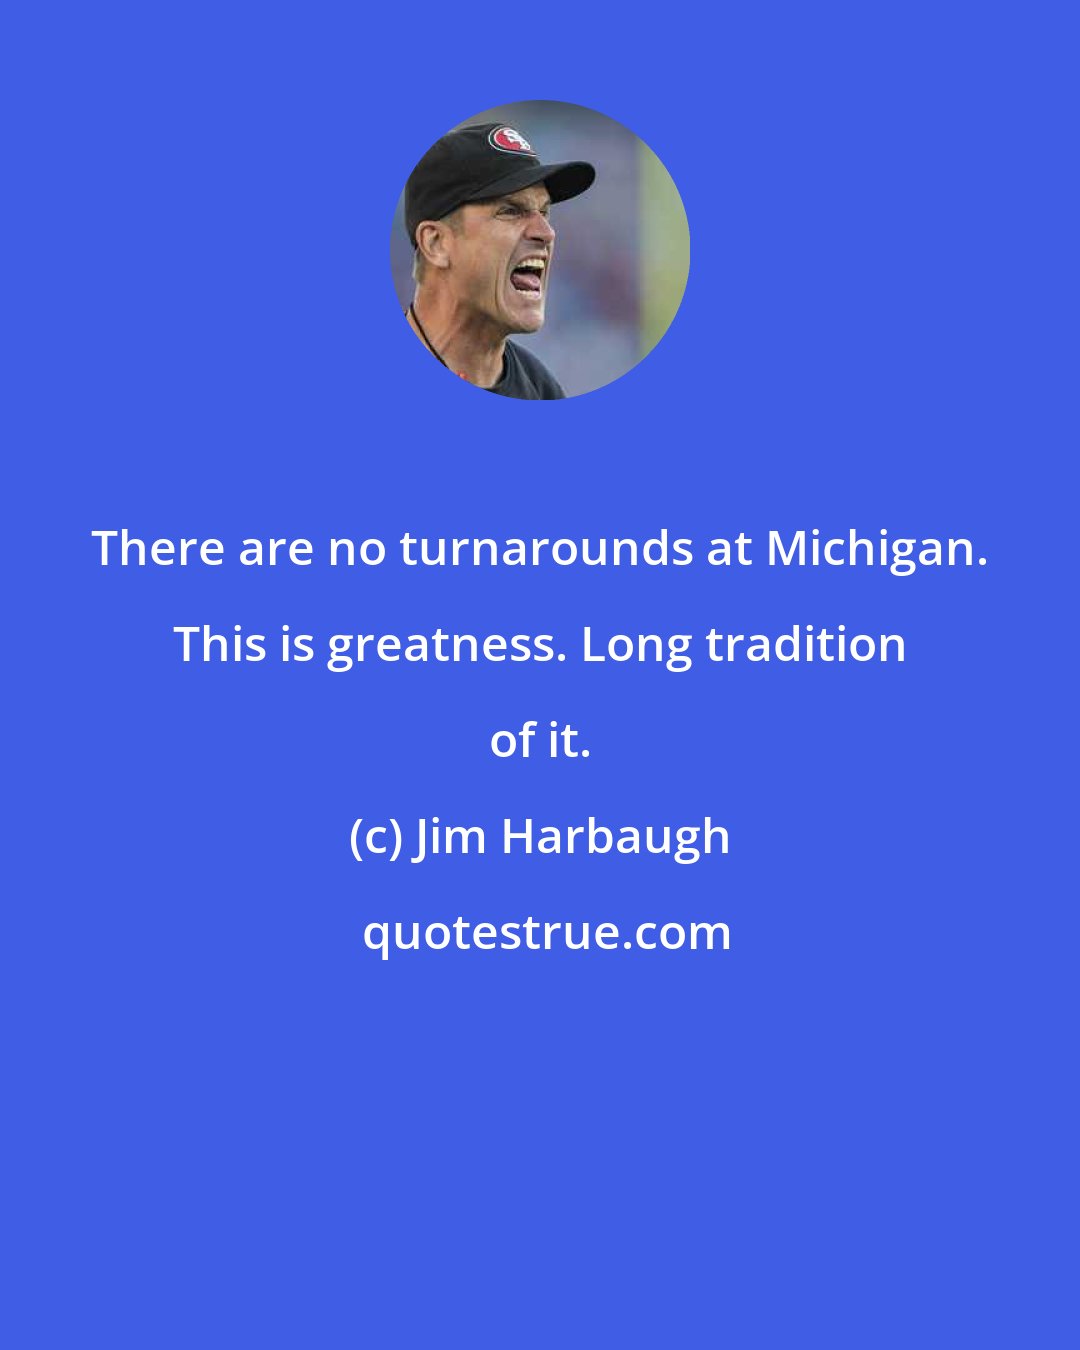 Jim Harbaugh: There are no turnarounds at Michigan. This is greatness. Long tradition of it.